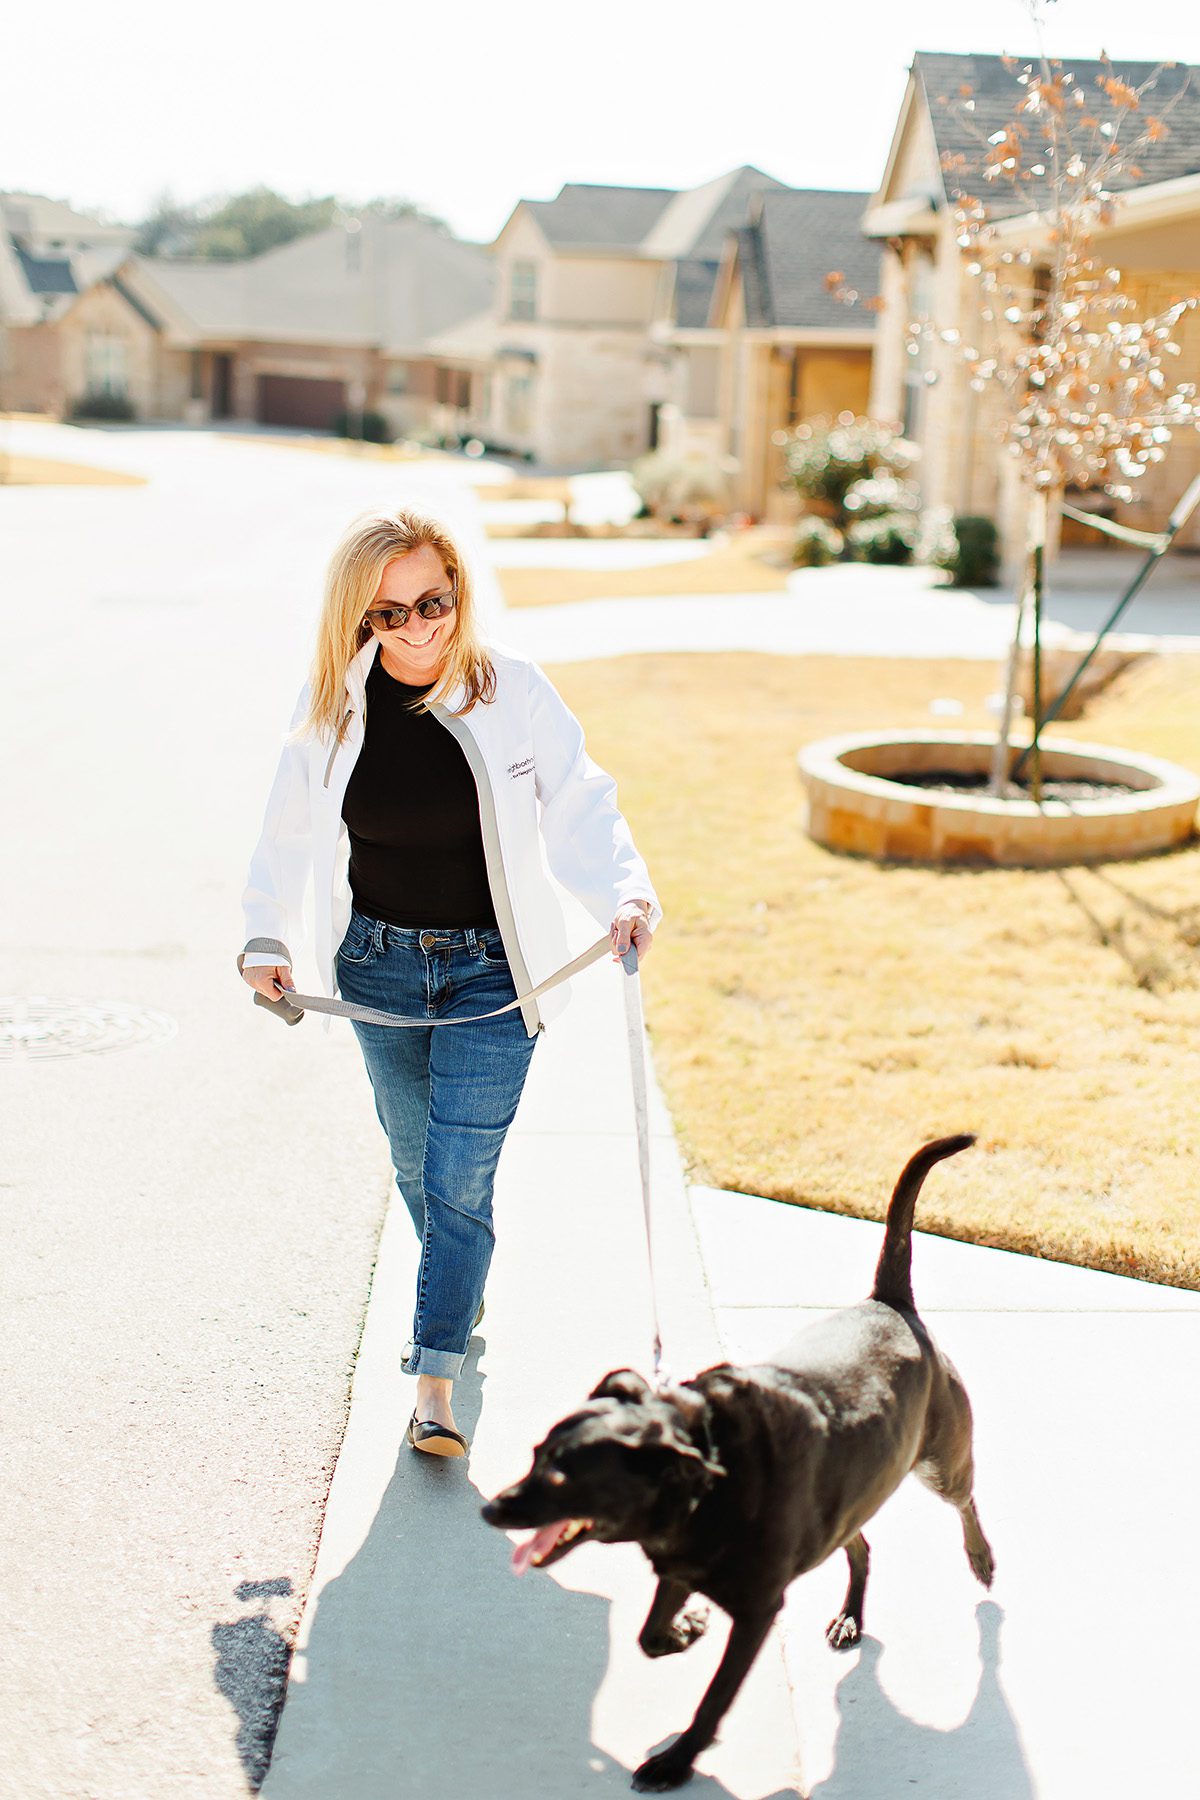 Fawn Crosby Dripping Springs lender with Neighborhood Loans walking her dog Clay in Belterra